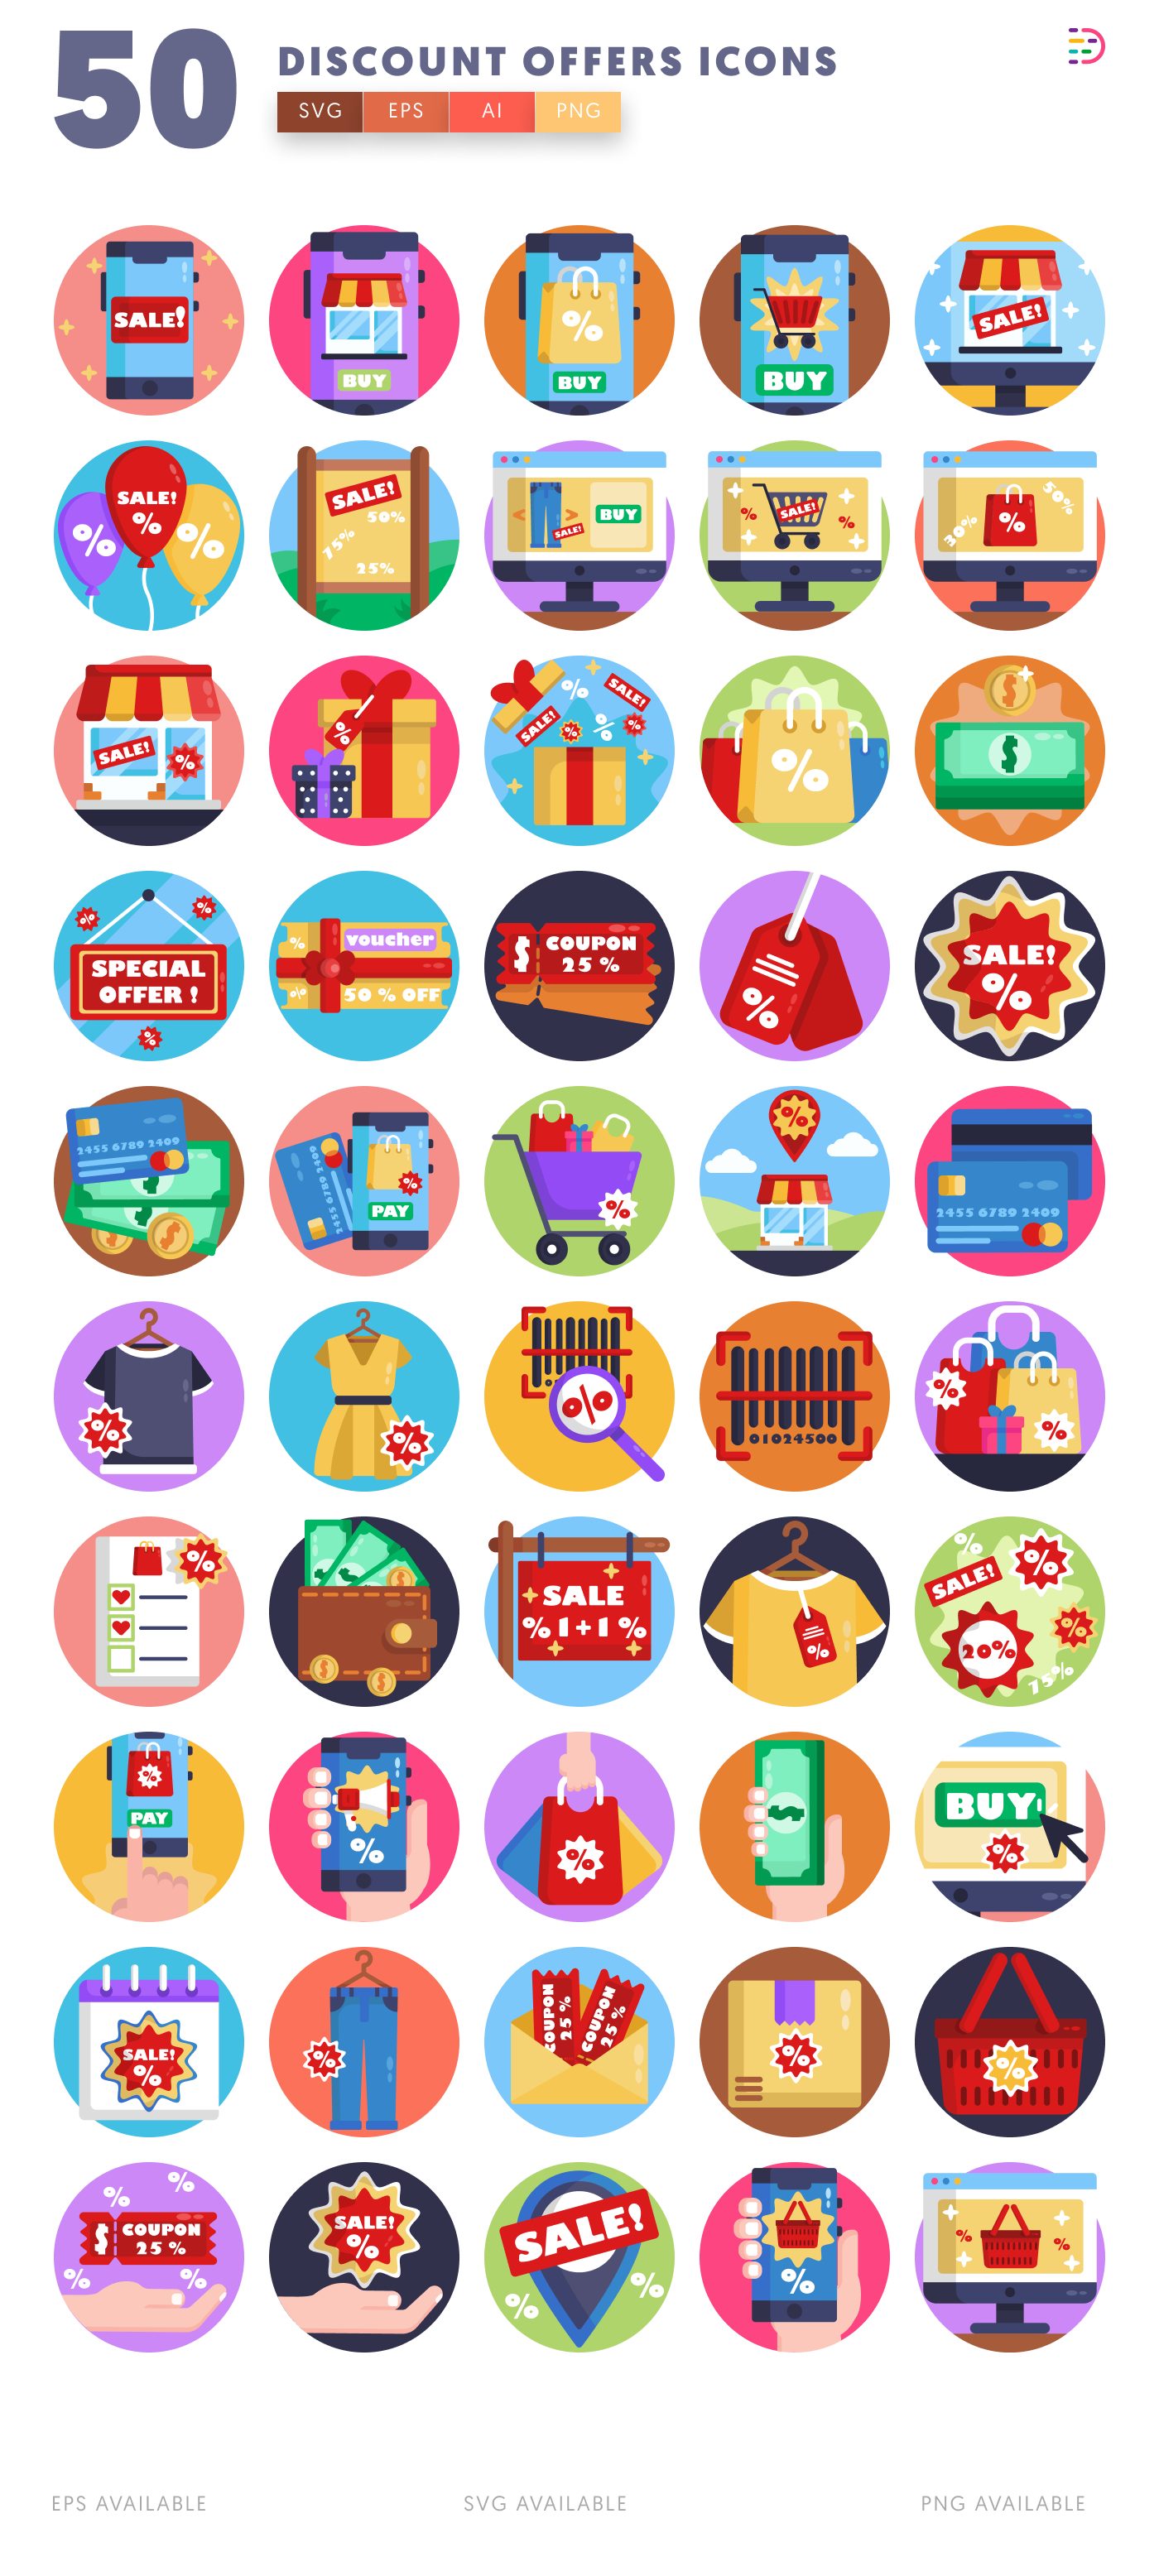 Discount and Sales Offers Icons pack with percentage off, free shipping, and buy one get one free designs